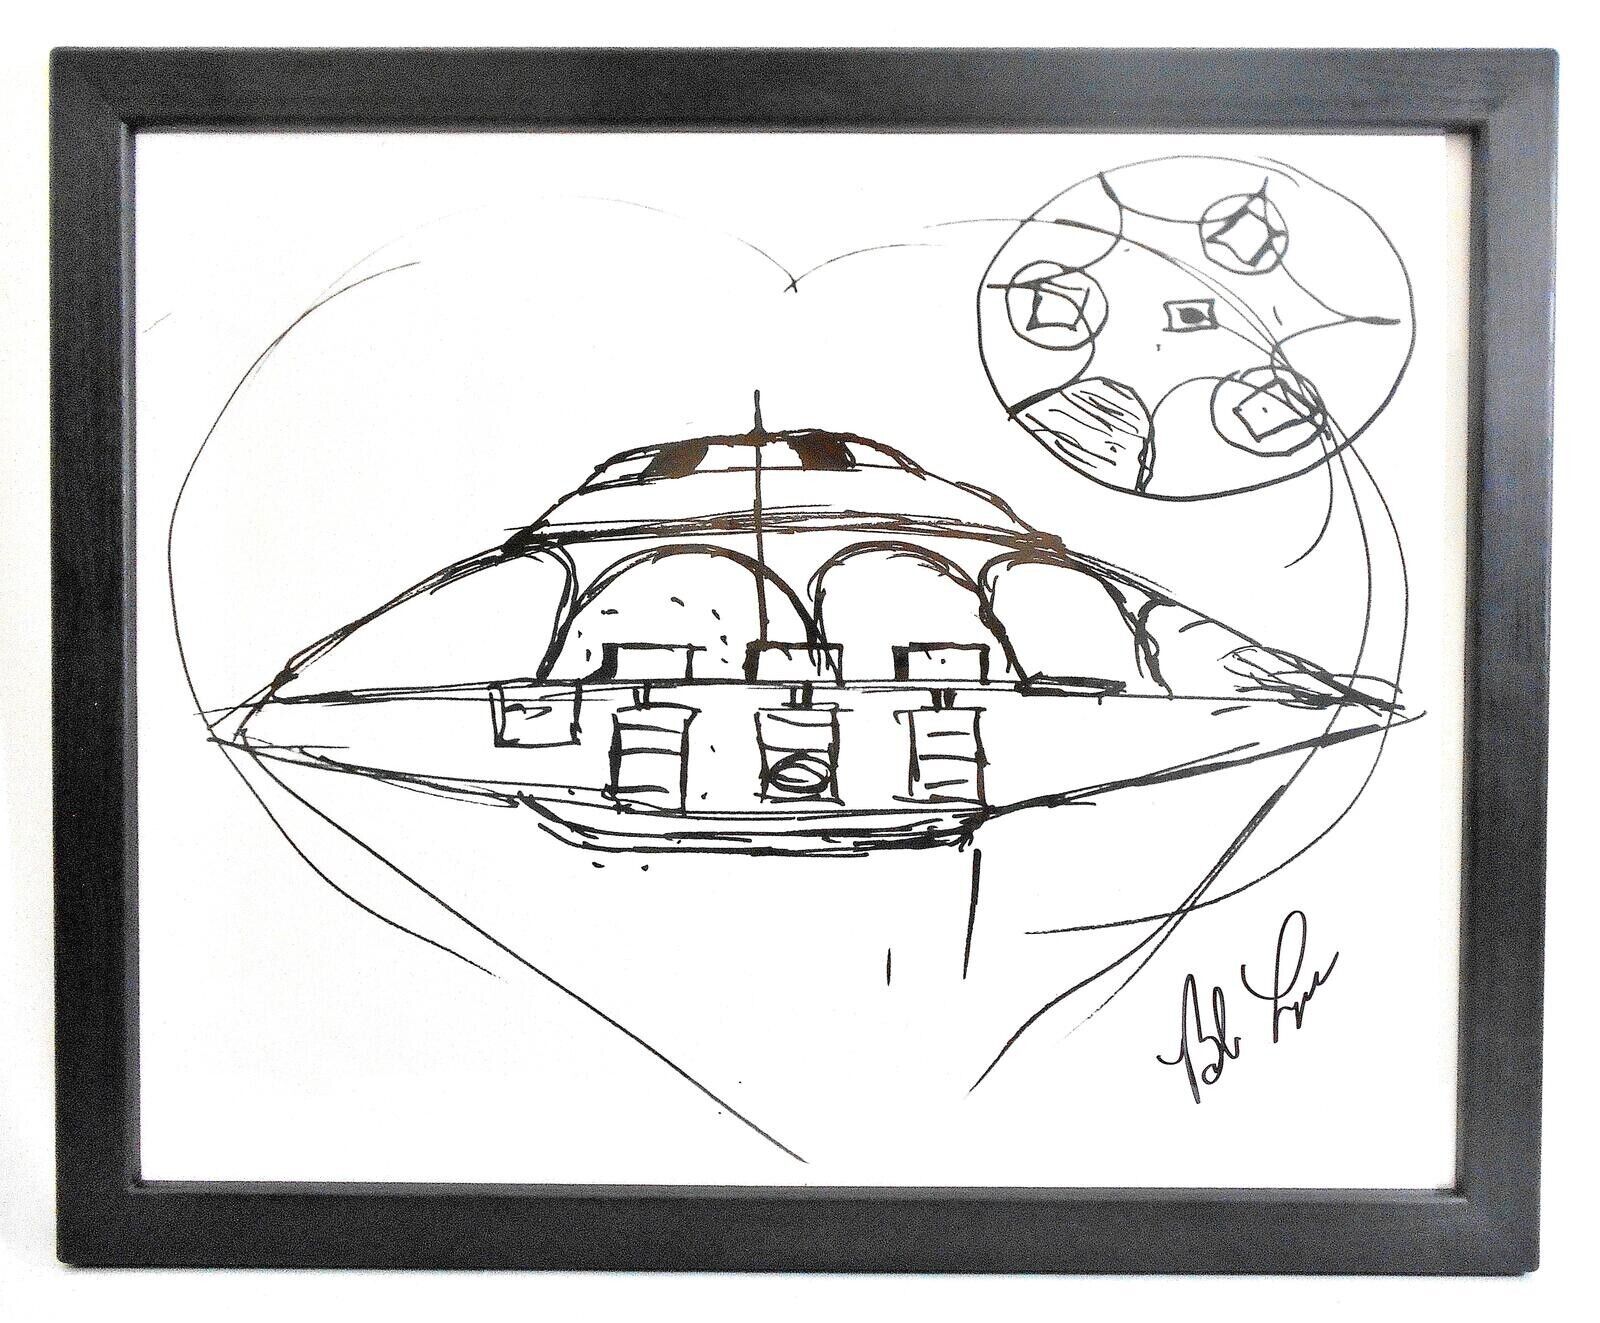 UFO SIGNED PHOTO AREA 51 BOB LAZAR FLYING SAUCER 8.5X11 AUTOGRAPH POSTER REPRINT